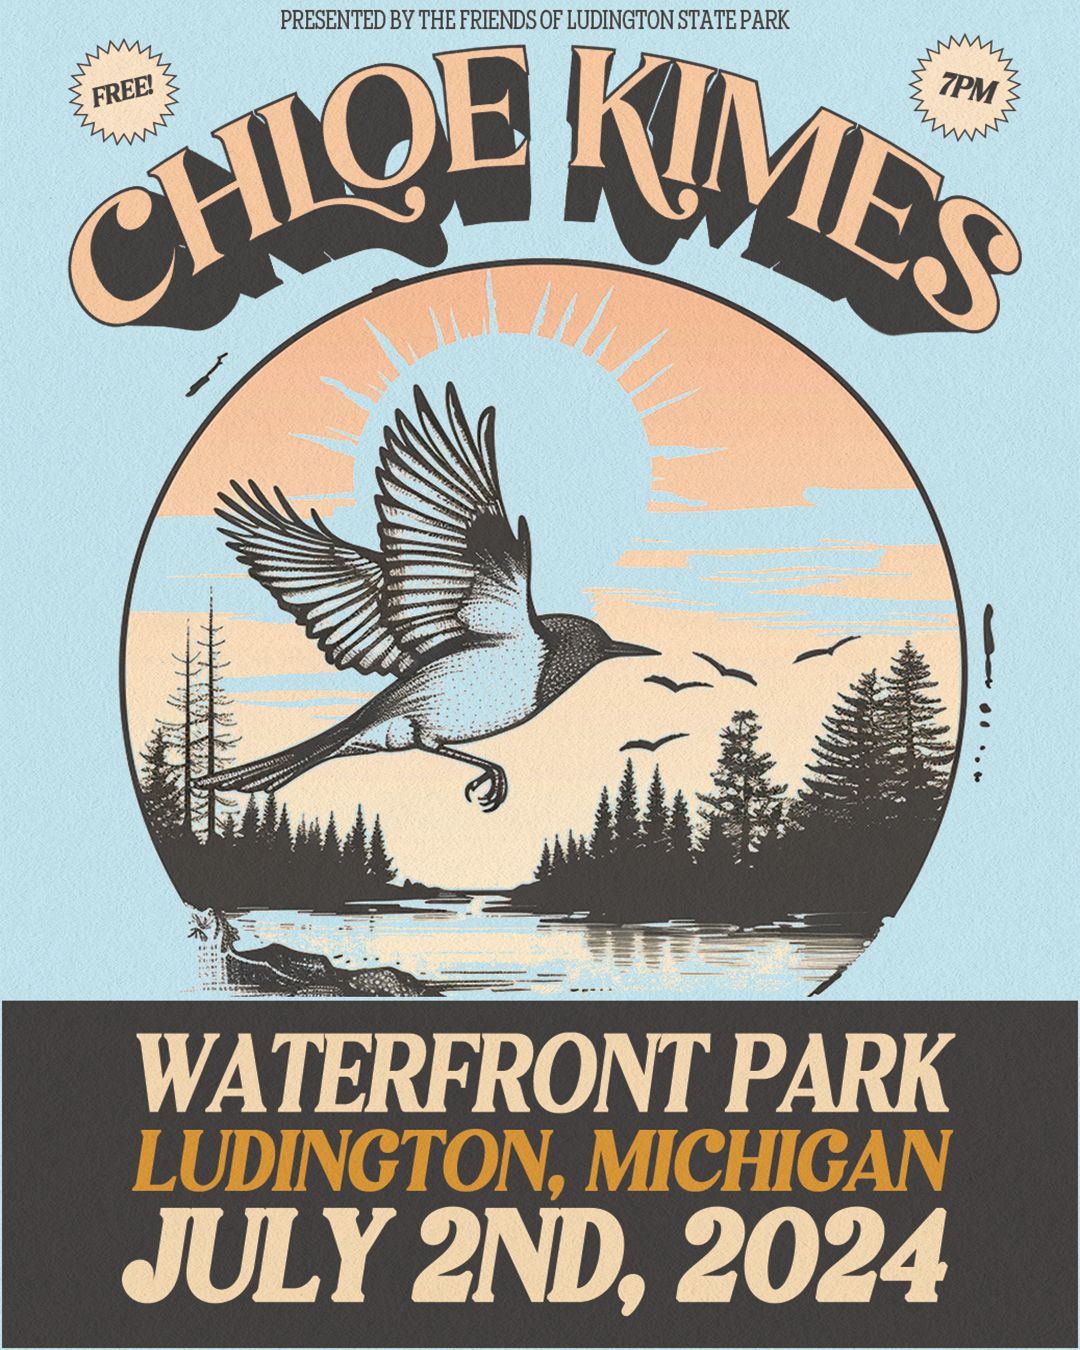 Chloe Kimes at Waterfront Park | Presented by Friends of Ludington State Park